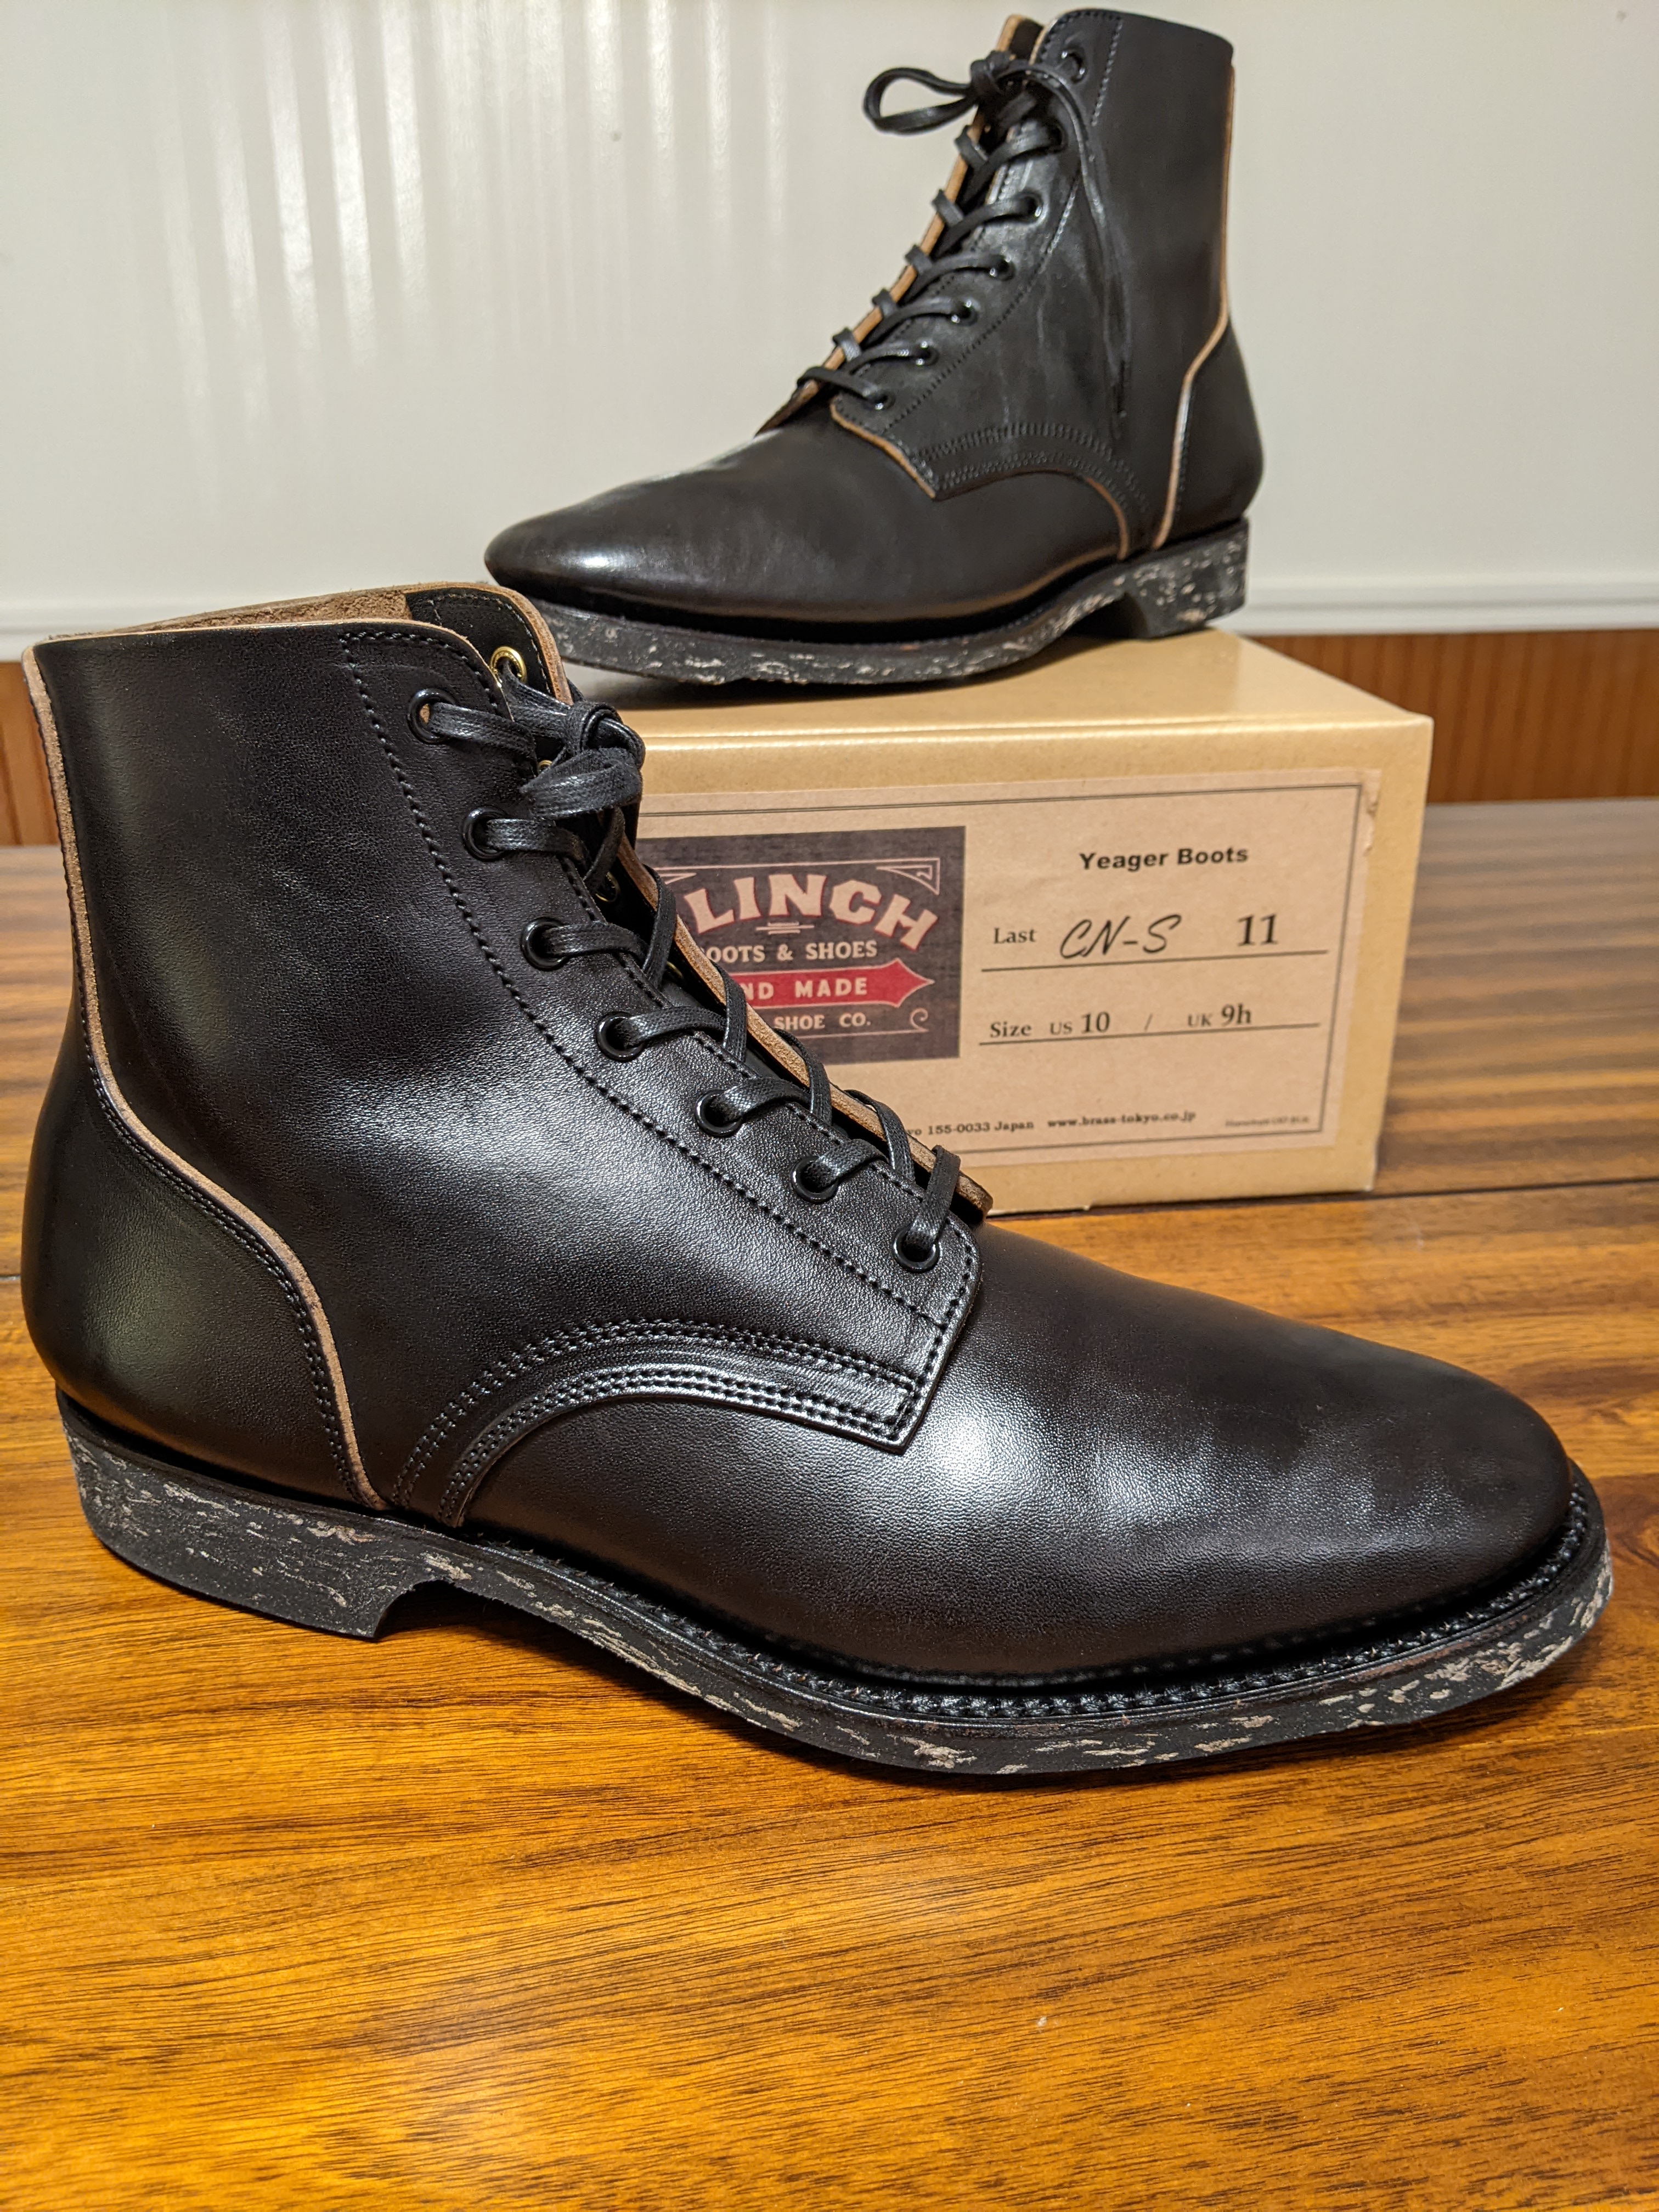 Clinch Black Overdyed Horsebutt Yeager Boots CN-S Clinch 11/US 10 